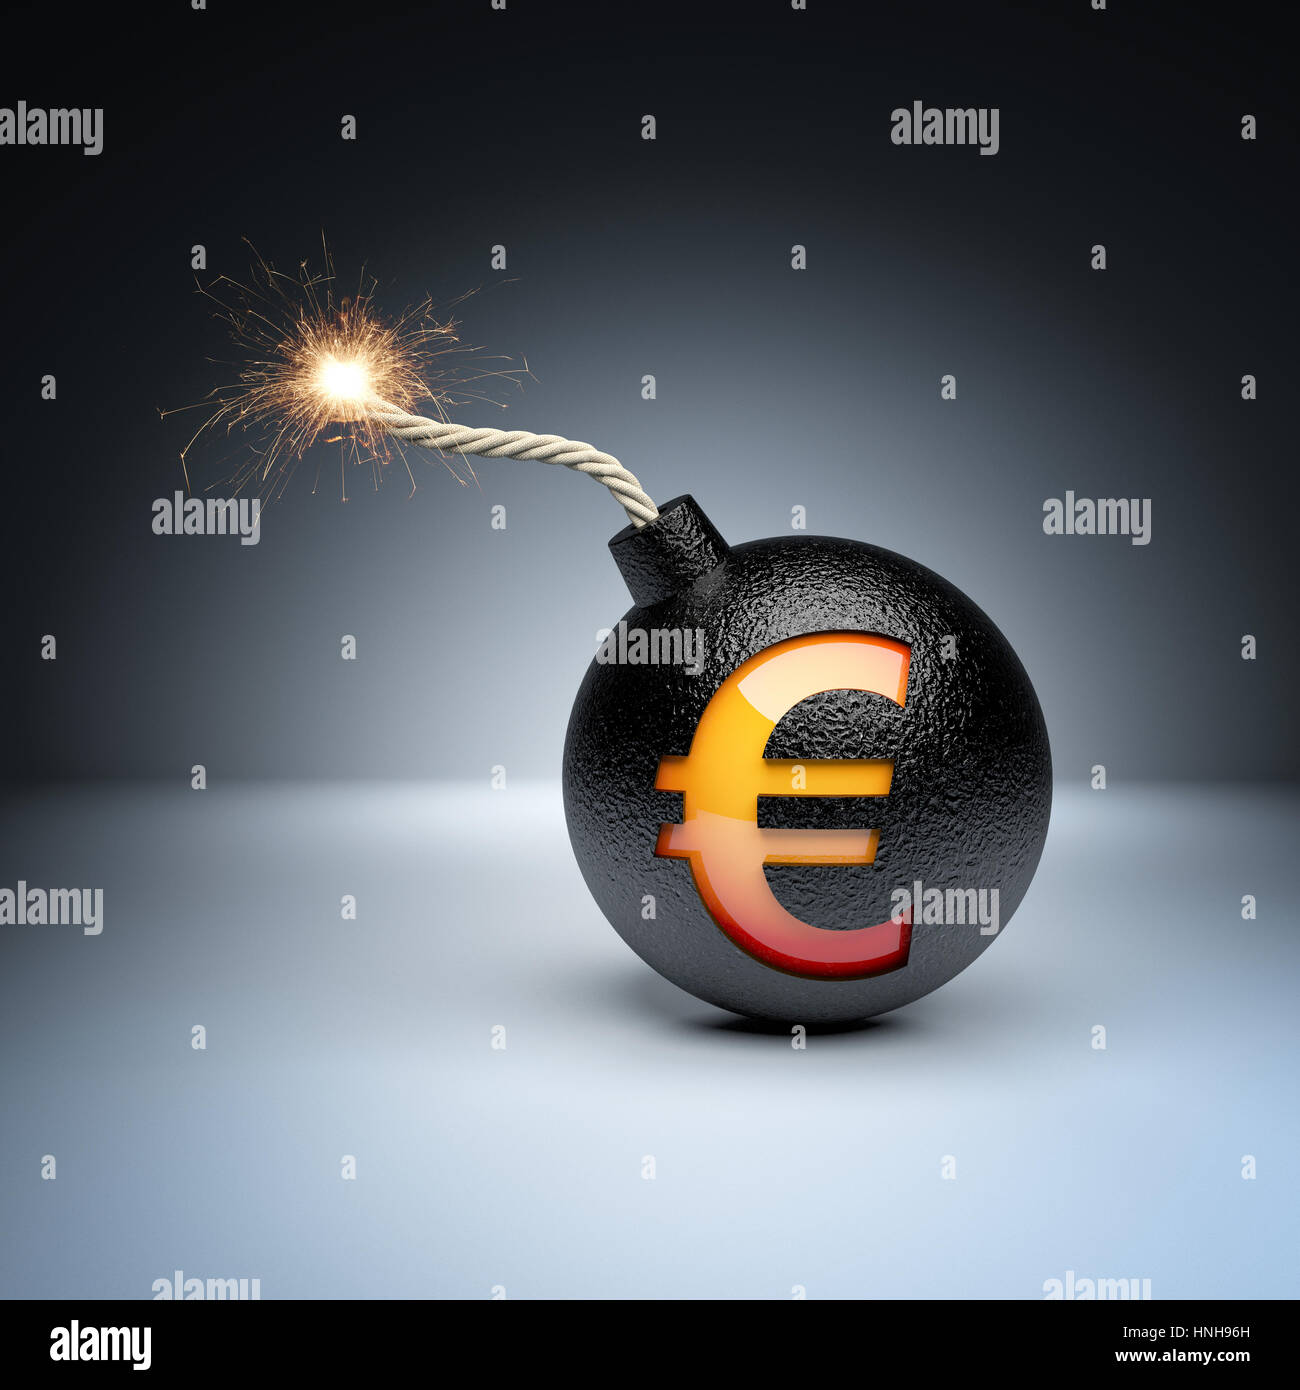 classic bomb with euro symbol 3d rendering image Stock Photo